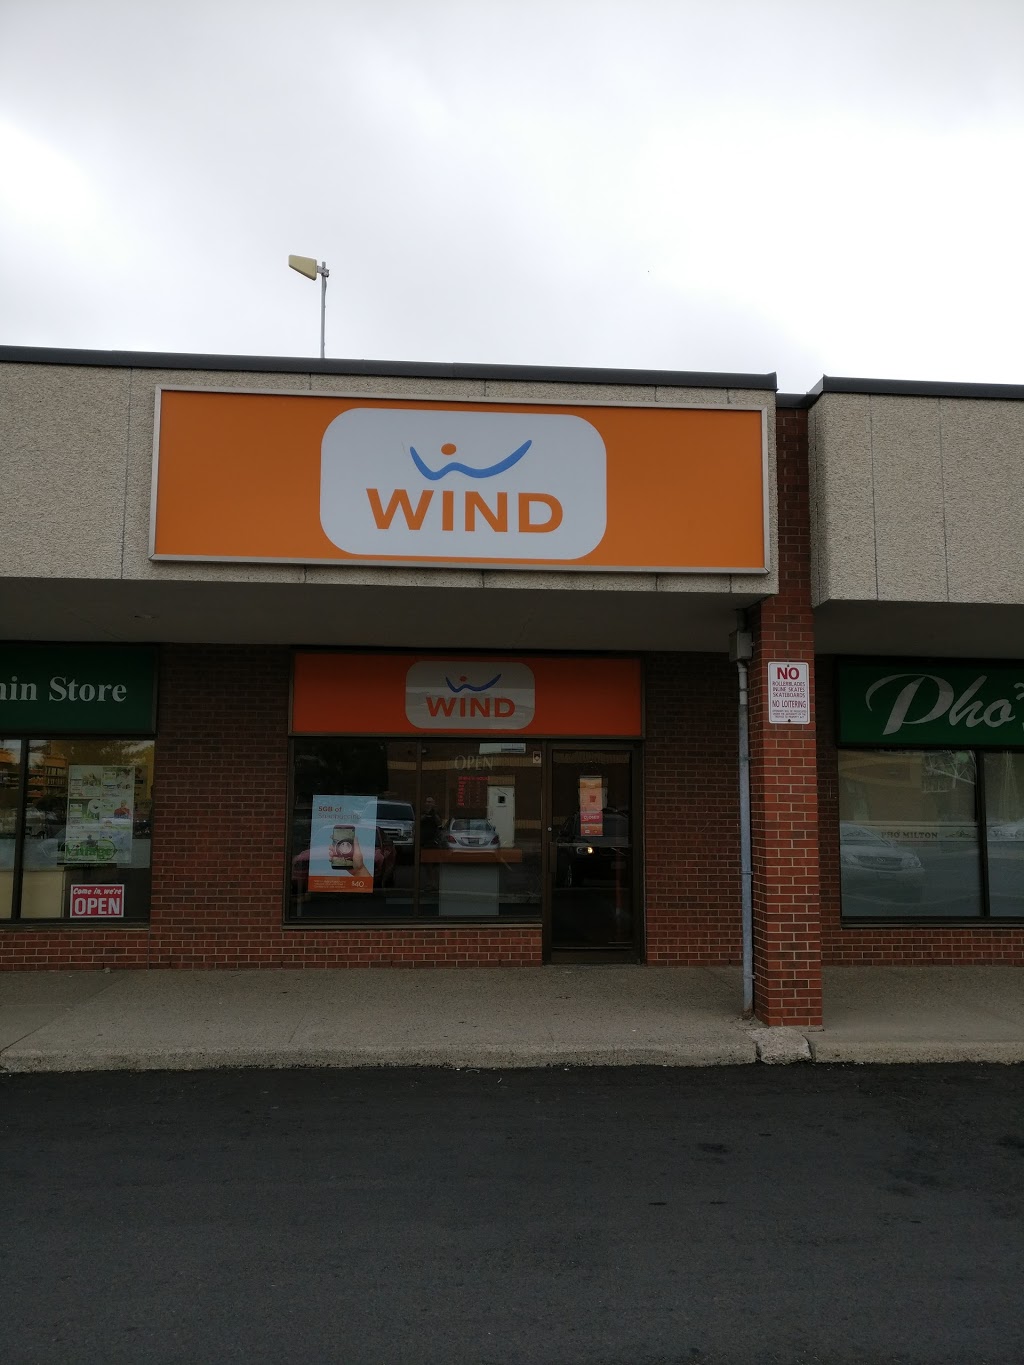 Freedom Mobile | 500 Laurier Ave, Milton, ON L9T 4R3, Canada | Phone: (905) 864-4600